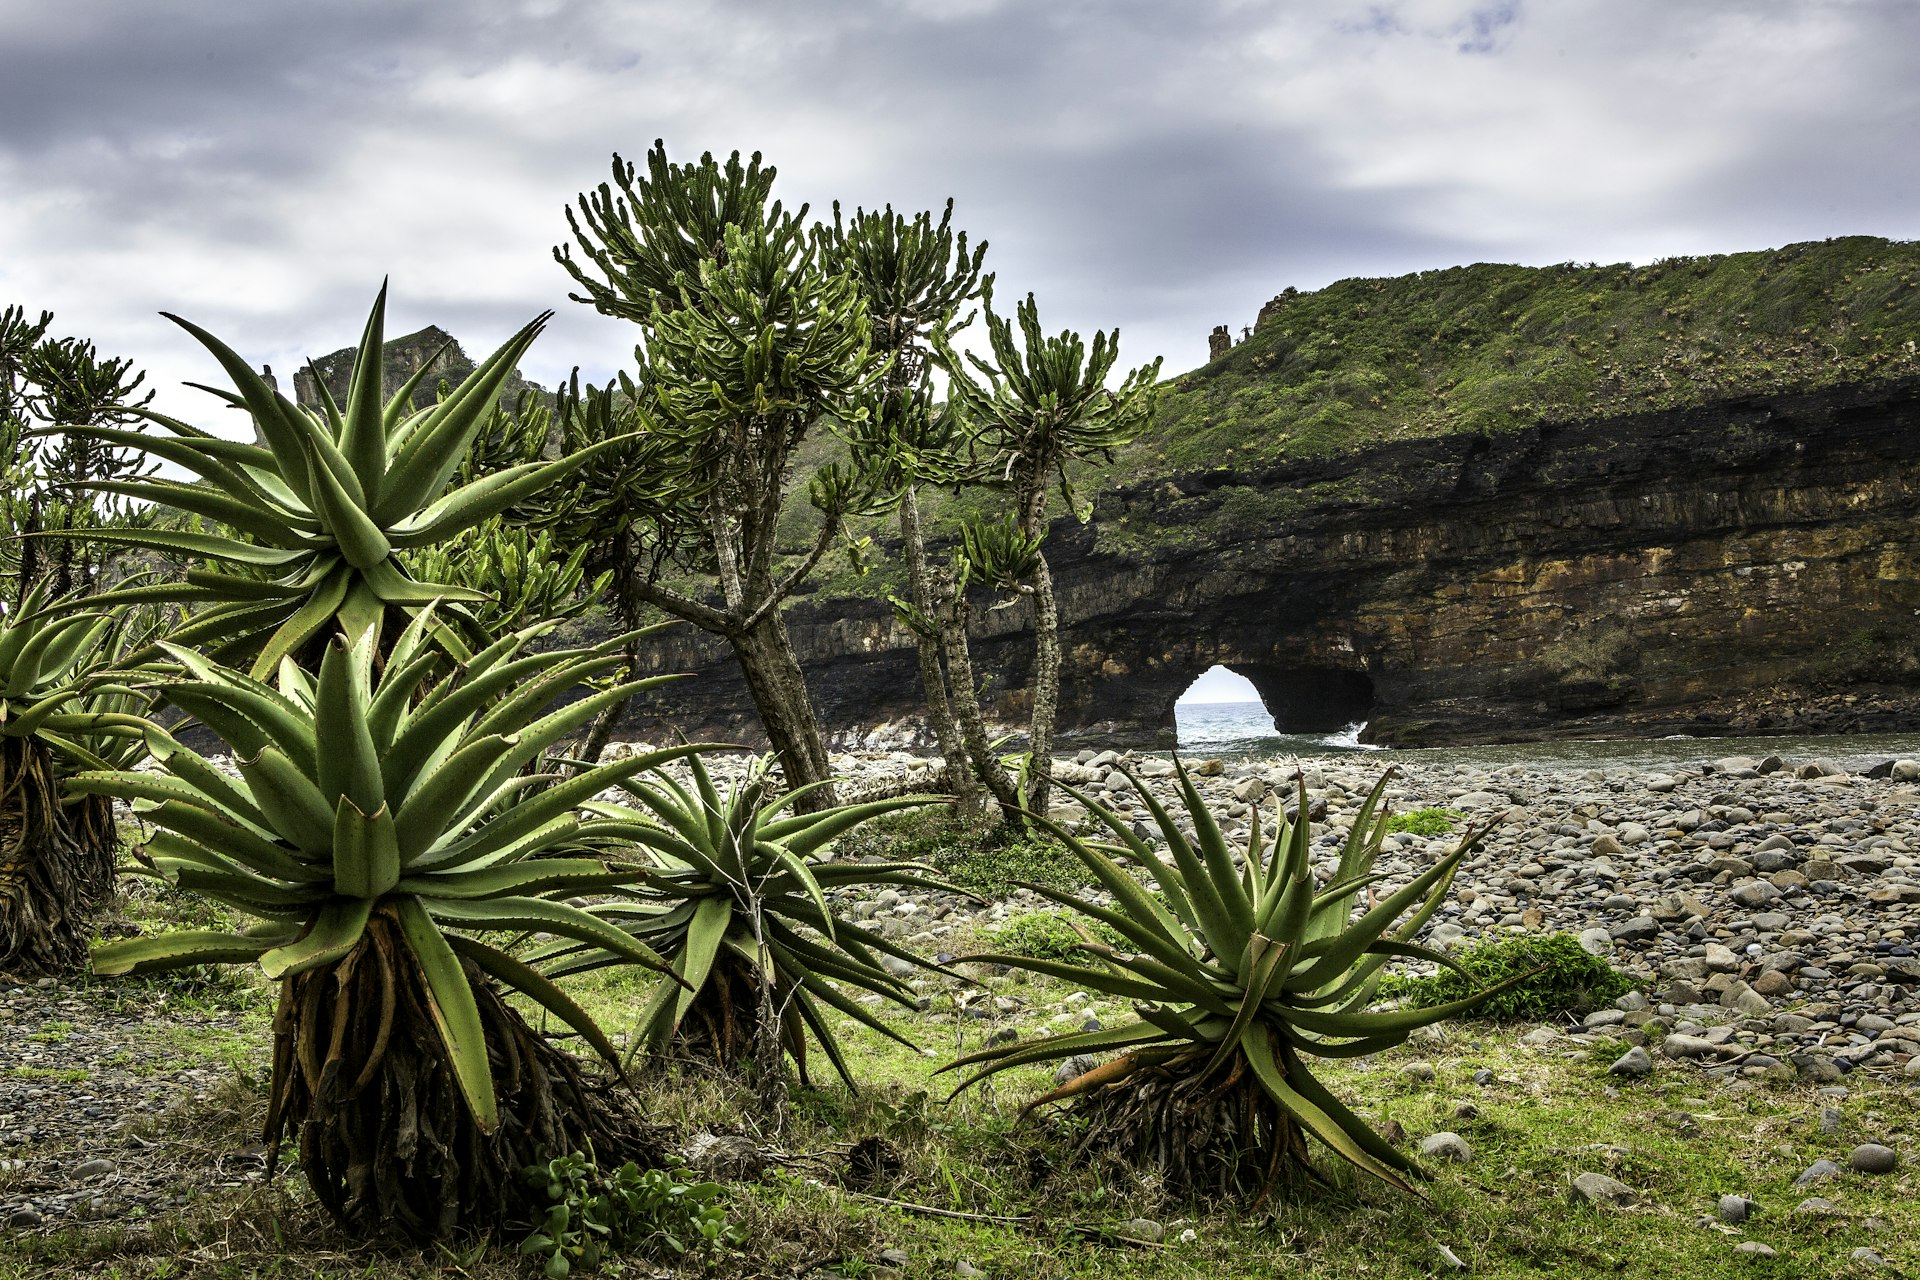 Spiky aloe plants grow by the ocean coast with the Hole in the Wall rock formation in the background